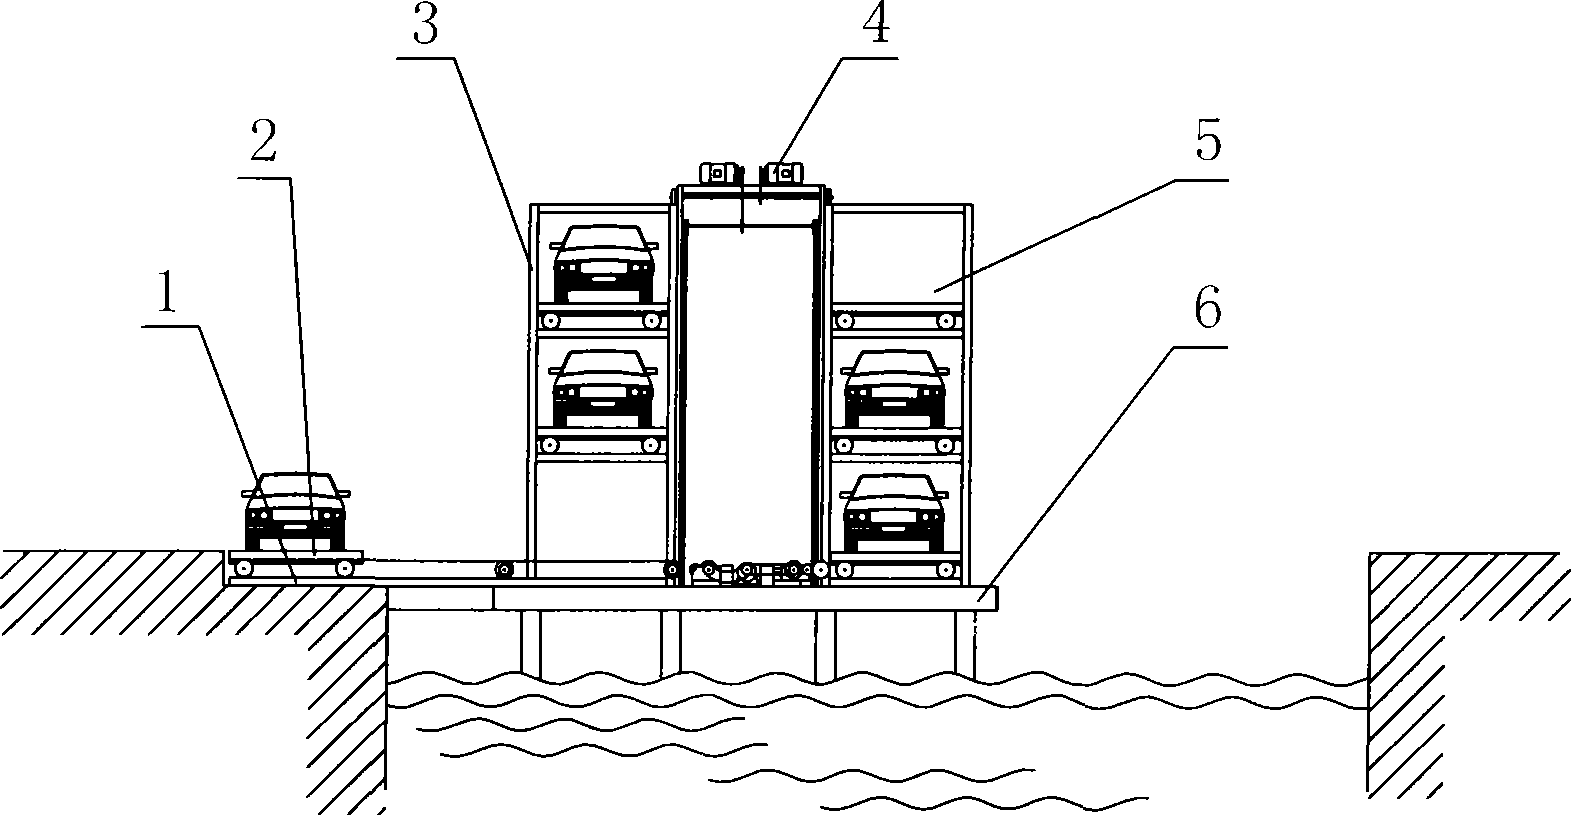 Automatic parking lot on water